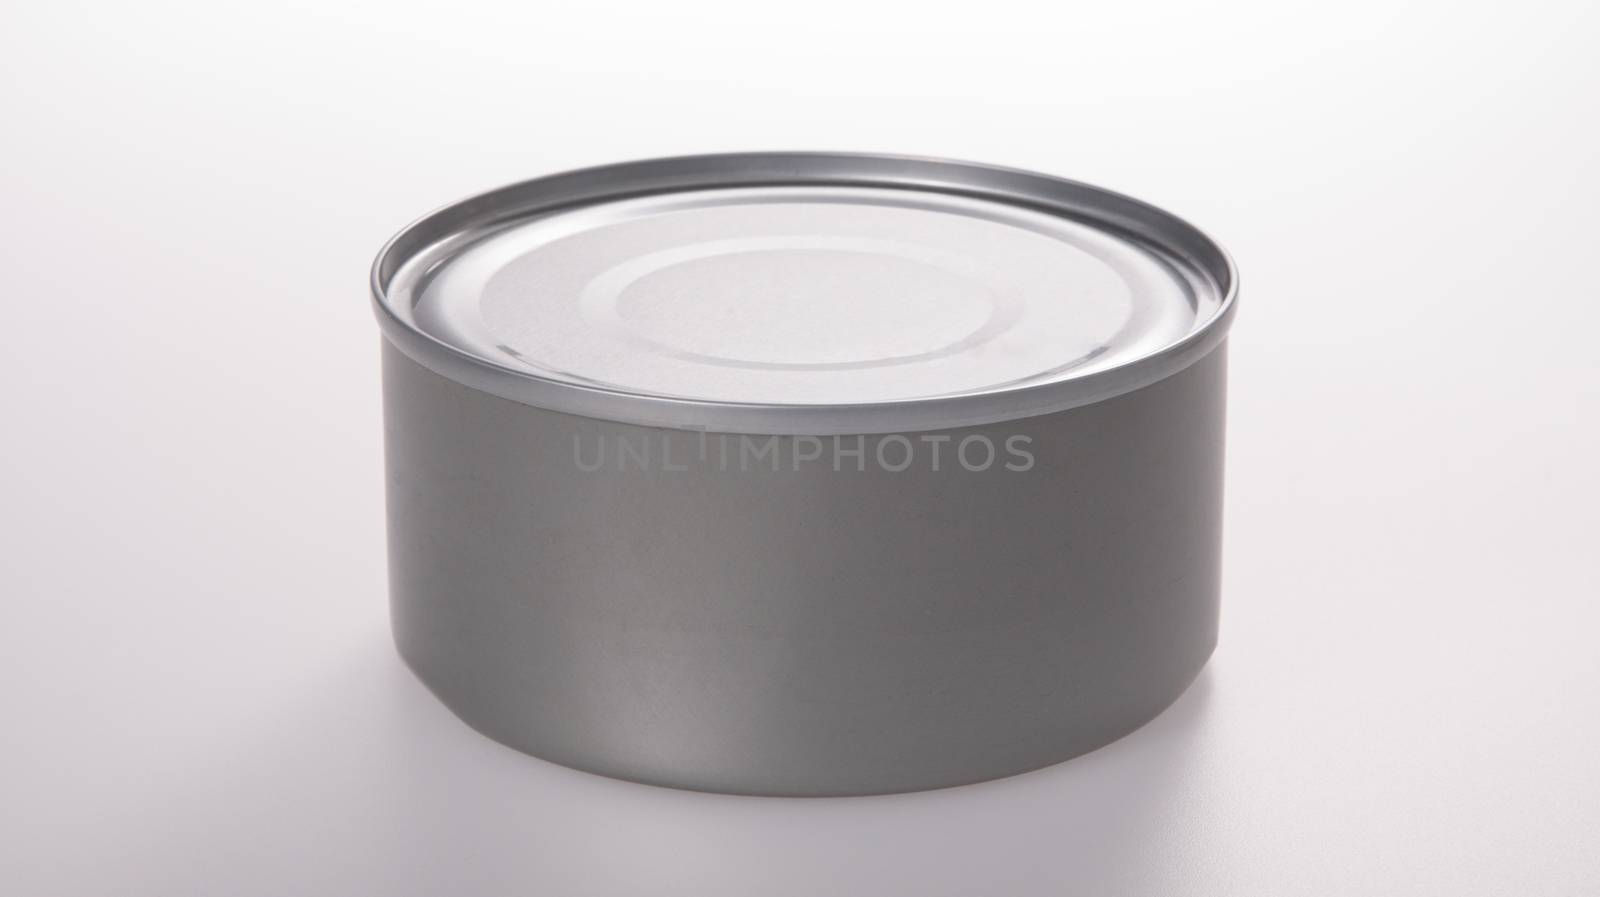 Aluminum shiny food can without label isolated on white